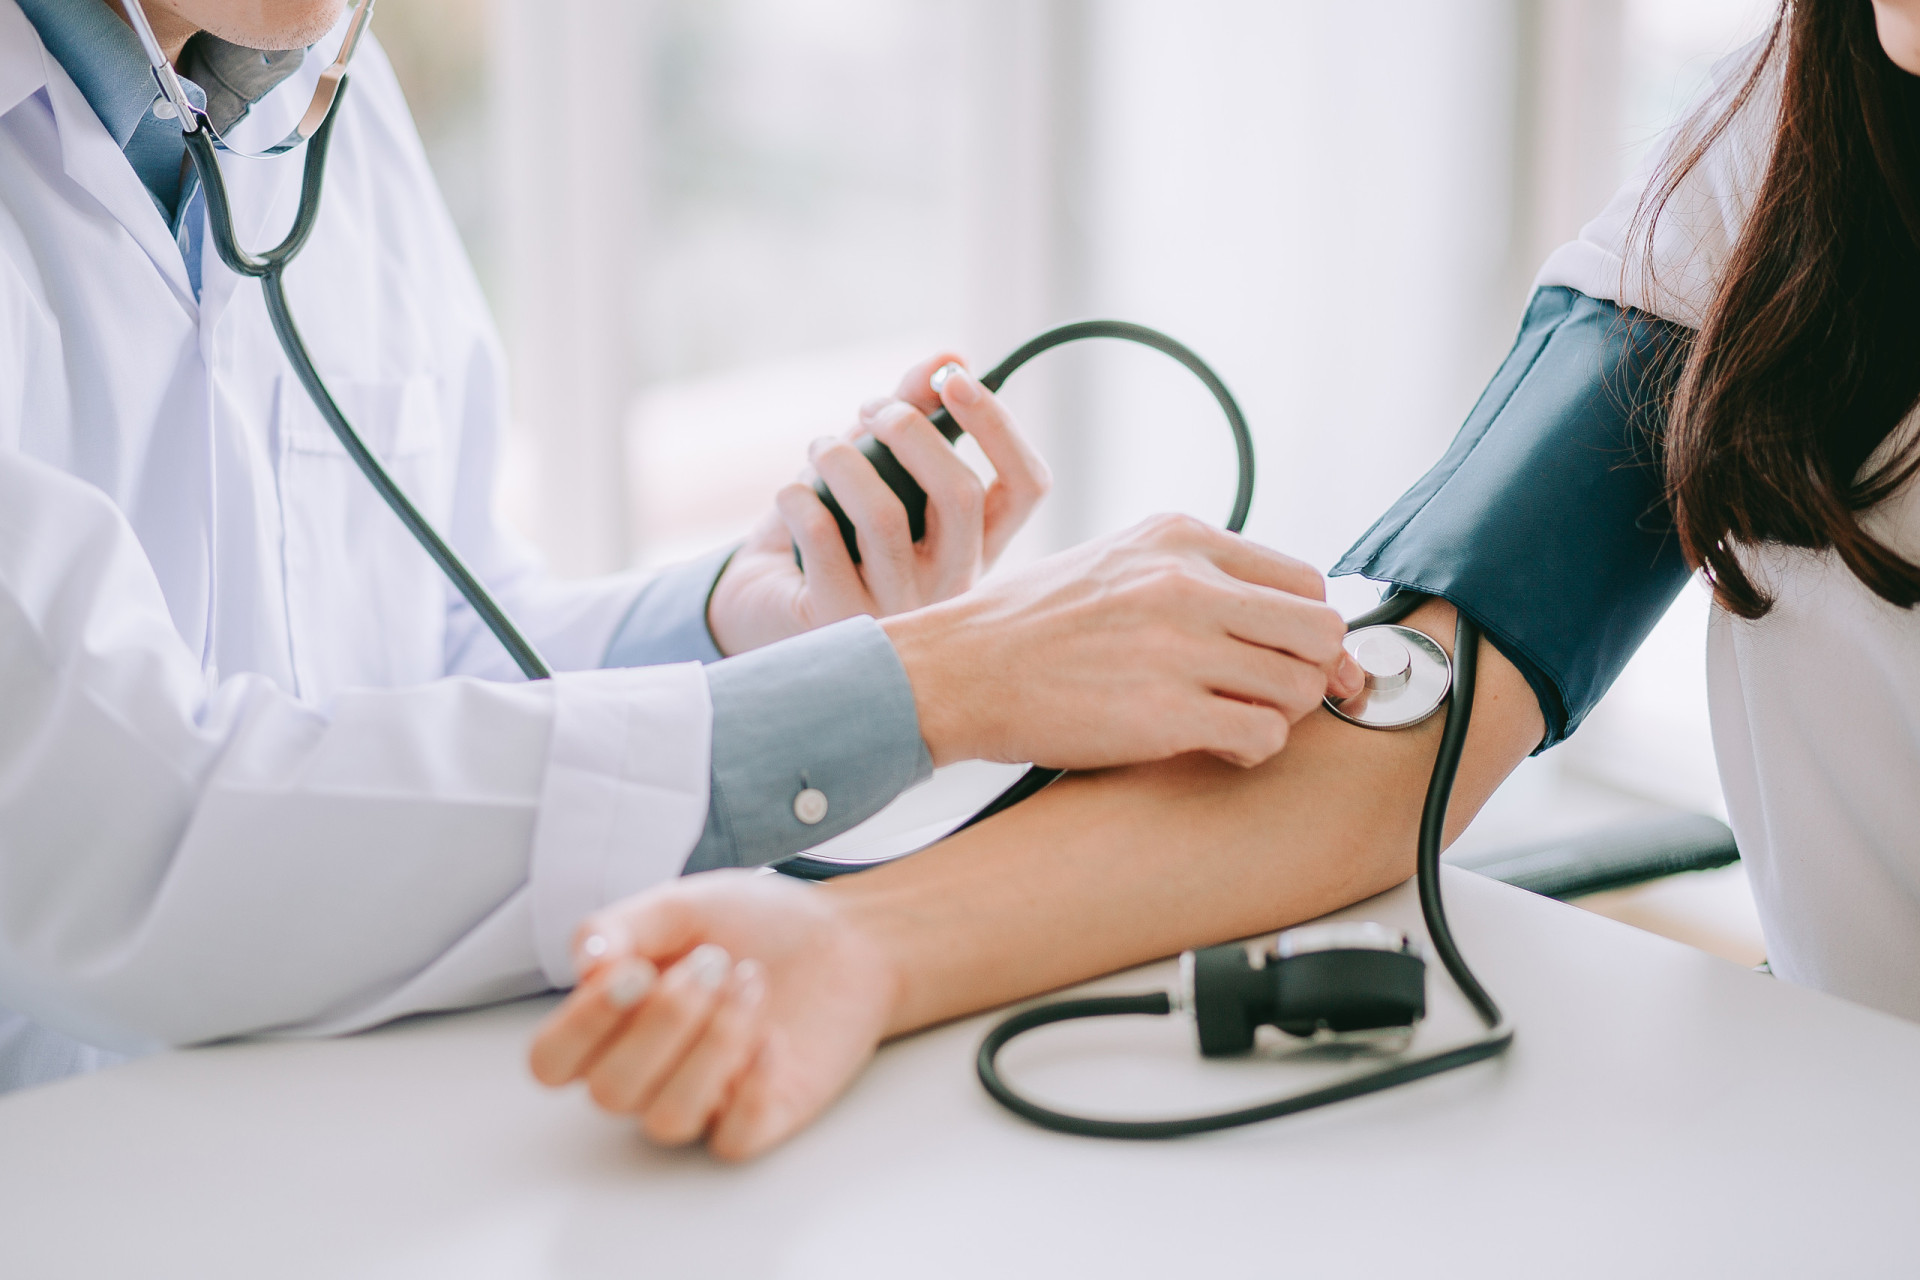 <p>Check your blood pressure at least once a year, or more often if your doctor says so.</p><p>Sources: (<a href="https://www.cdc.gov/ncbddd/dvt/facts.html#:~:text=Deep%20vein%20thrombosis%20(DVT)%20is,also%20occur%20in%20the%20arm." rel="noopener">CDC</a>) (<a href="https://www.everydayhealth.com/dvt-pictures/six-simple-steps-avoid-deep-vein-thrombosis.aspx" rel="noopener">Everyday Health</a>) (<a href="https://www.mayoclinic.org/diseases-conditions/deep-vein-thrombosis/symptoms-causes/syc-20352557#:~:text=Deep%20vein%20thrombosis%20(DVT)%20occurs,affect%20how%20the%20blood%20clots." rel="noopener">Mayo Clinic</a>)</p><p>See also: <a href="https://www.starsinsider.com/health/516686/the-health-risks-of-each-blood-type">The health risks of each blood type</a></p><p><a href="https://www.msn.com/en-us/community/channel/vid-7xx8mnucu55yw63we9va2gwr7uihbxwc68fxqp25x6tg4ftibpra?cvid=94631541bc0f4f89bfd59158d696ad7e">Follow us and access great exclusive content every day</a></p>